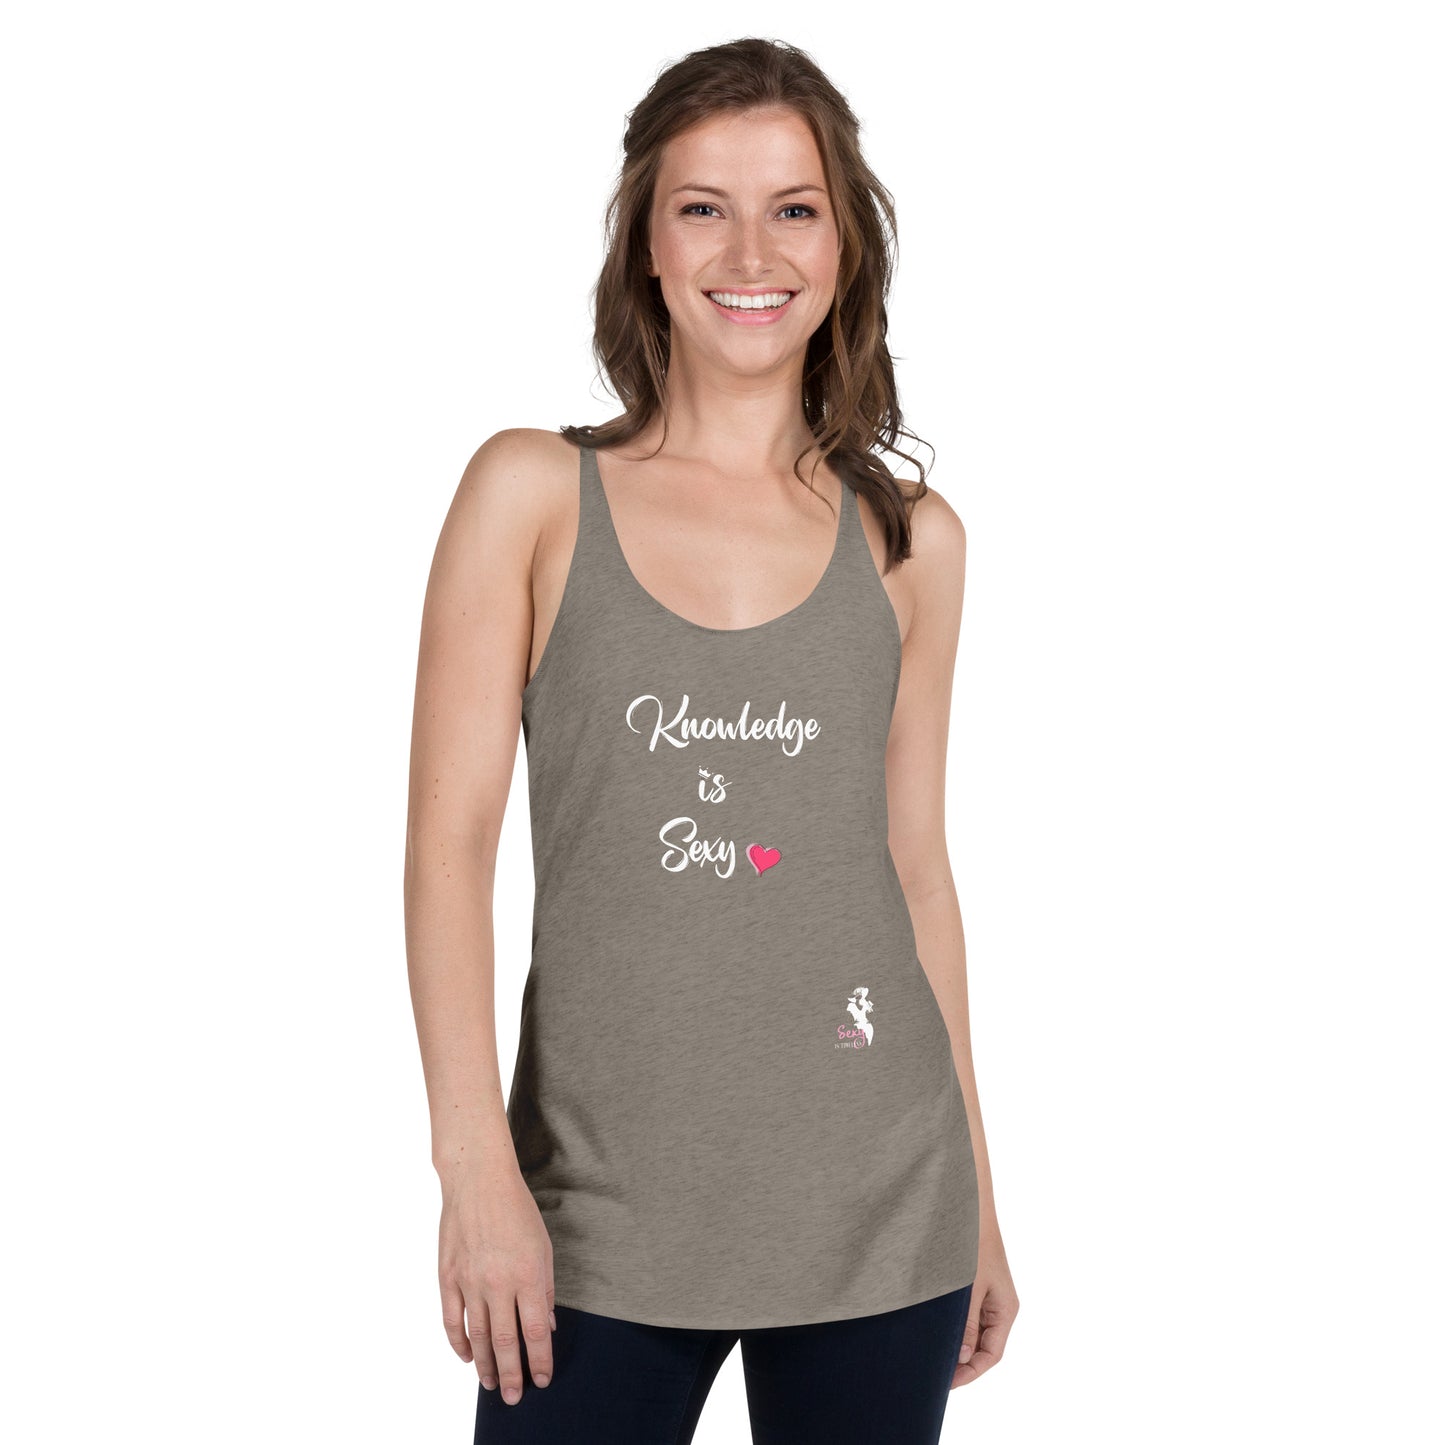 Women's Racerback Tank - Knowledge is Sexy - Colors